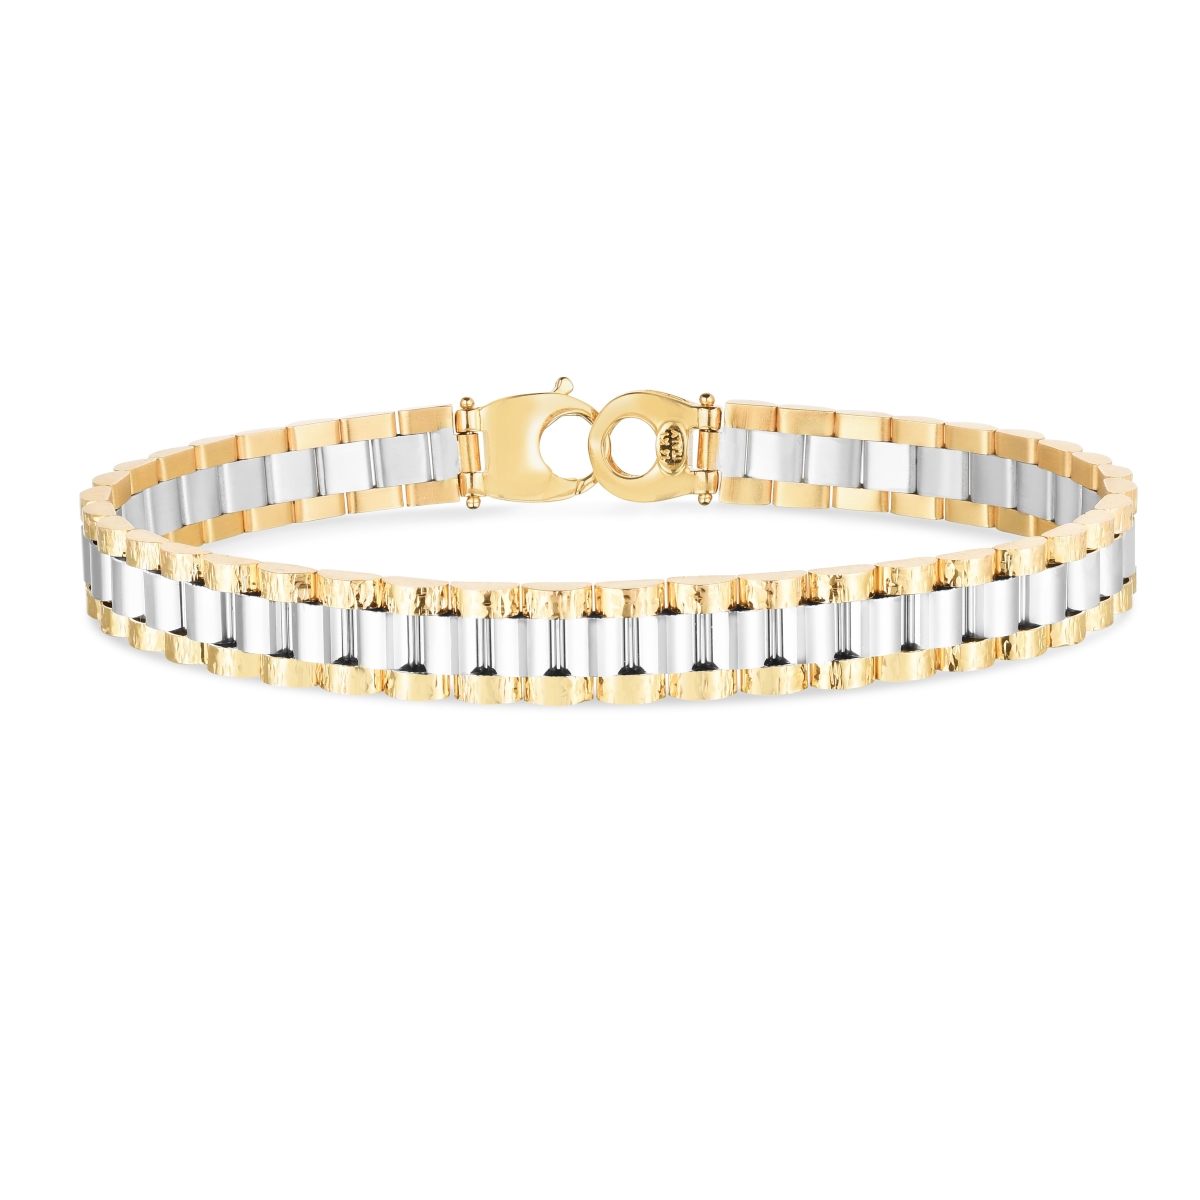 Bagatela 7.25 in. 14K Two Tone Gold Textured Rail Road Link Bracelet with Fancy Pear Shaped Lobster Clasp